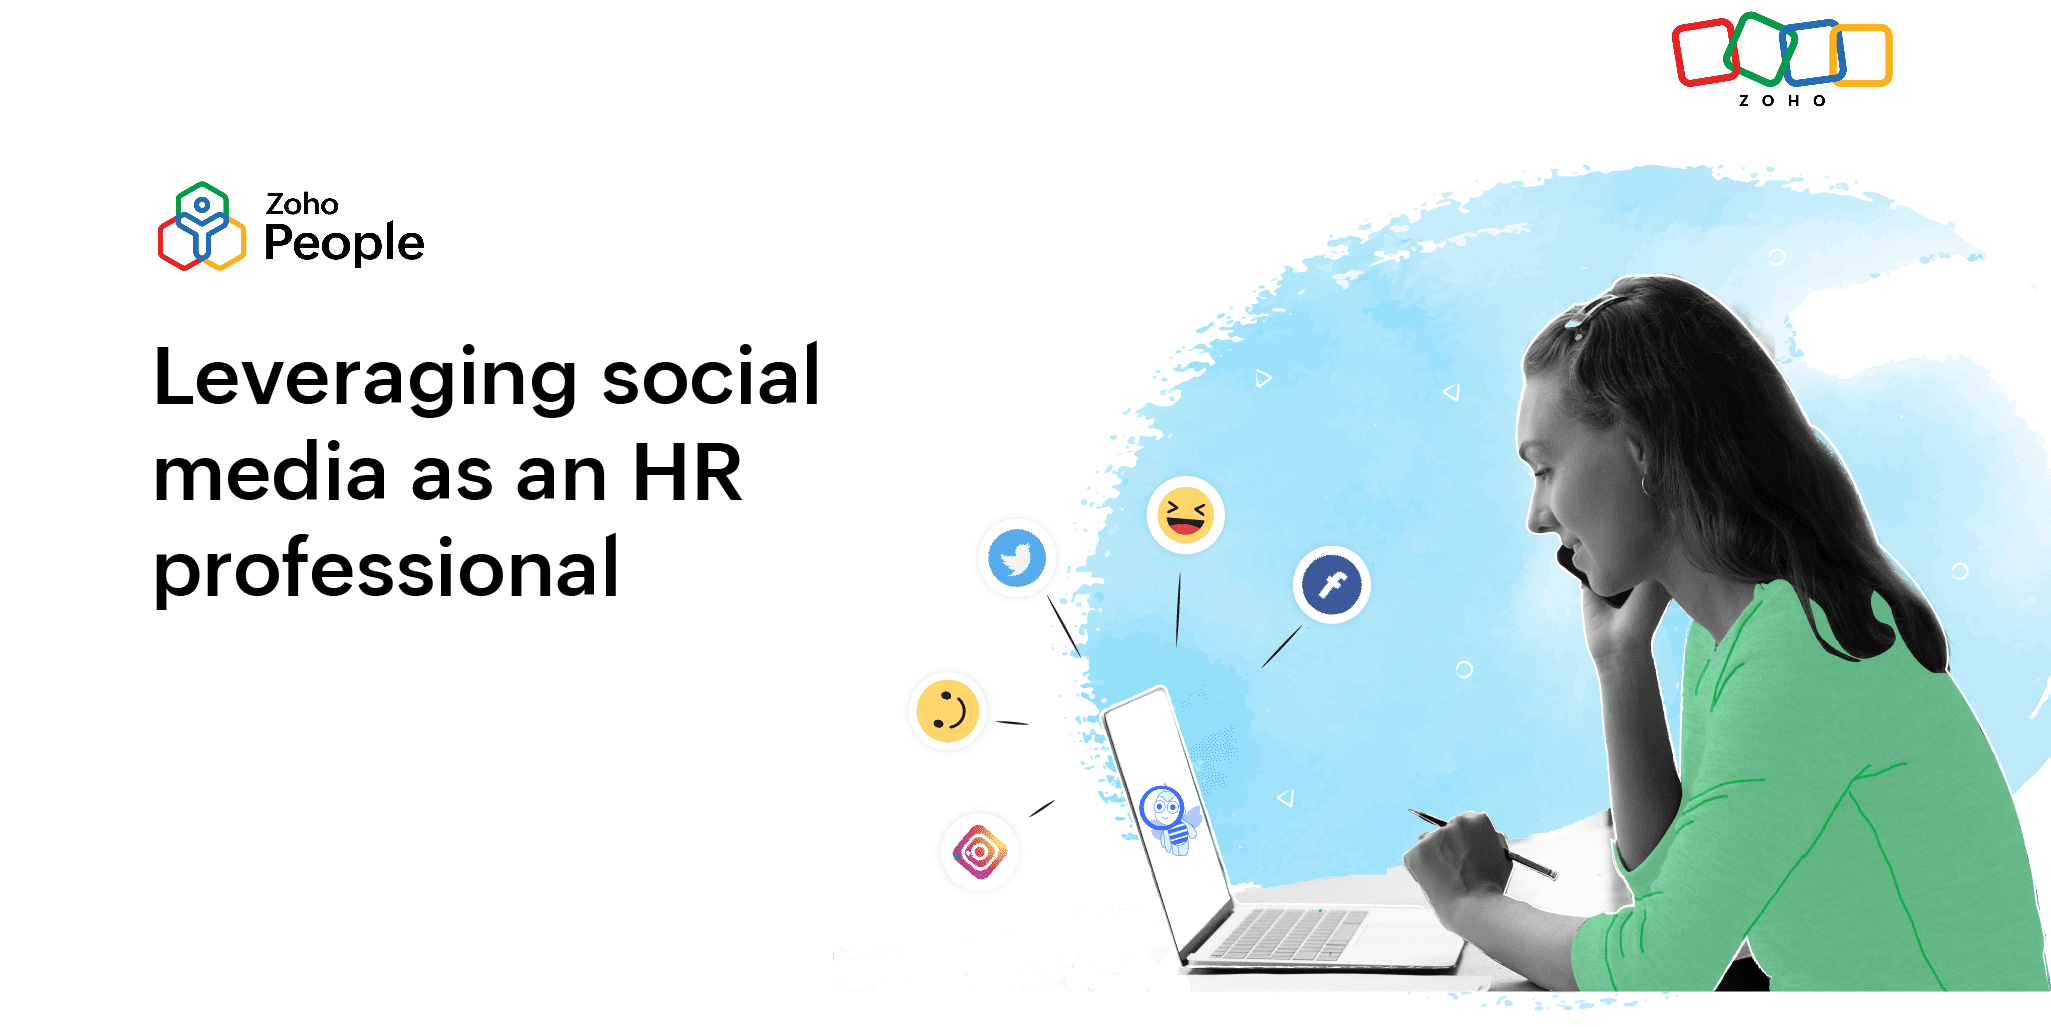 4 ways to leverage social media as an HR professional